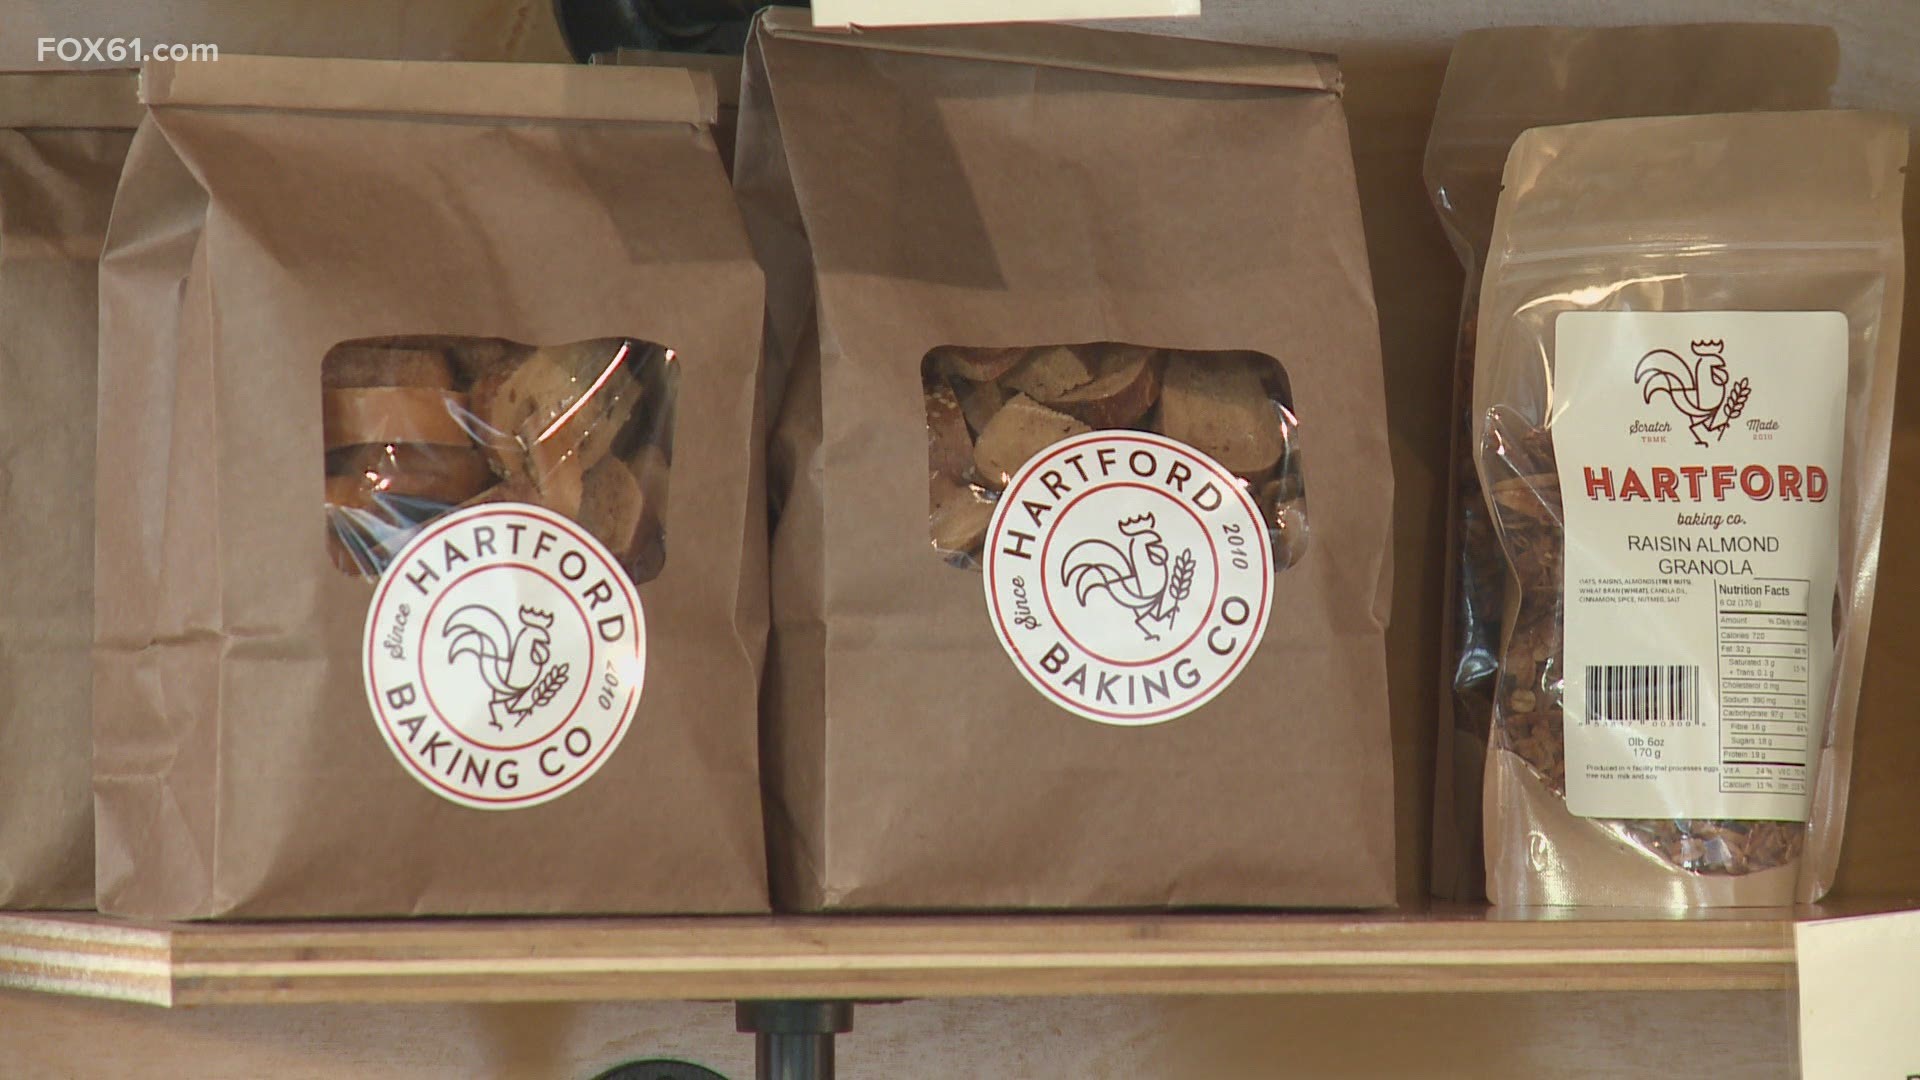 FOX61's Sean Pragano visited the bakery and all its goodies.